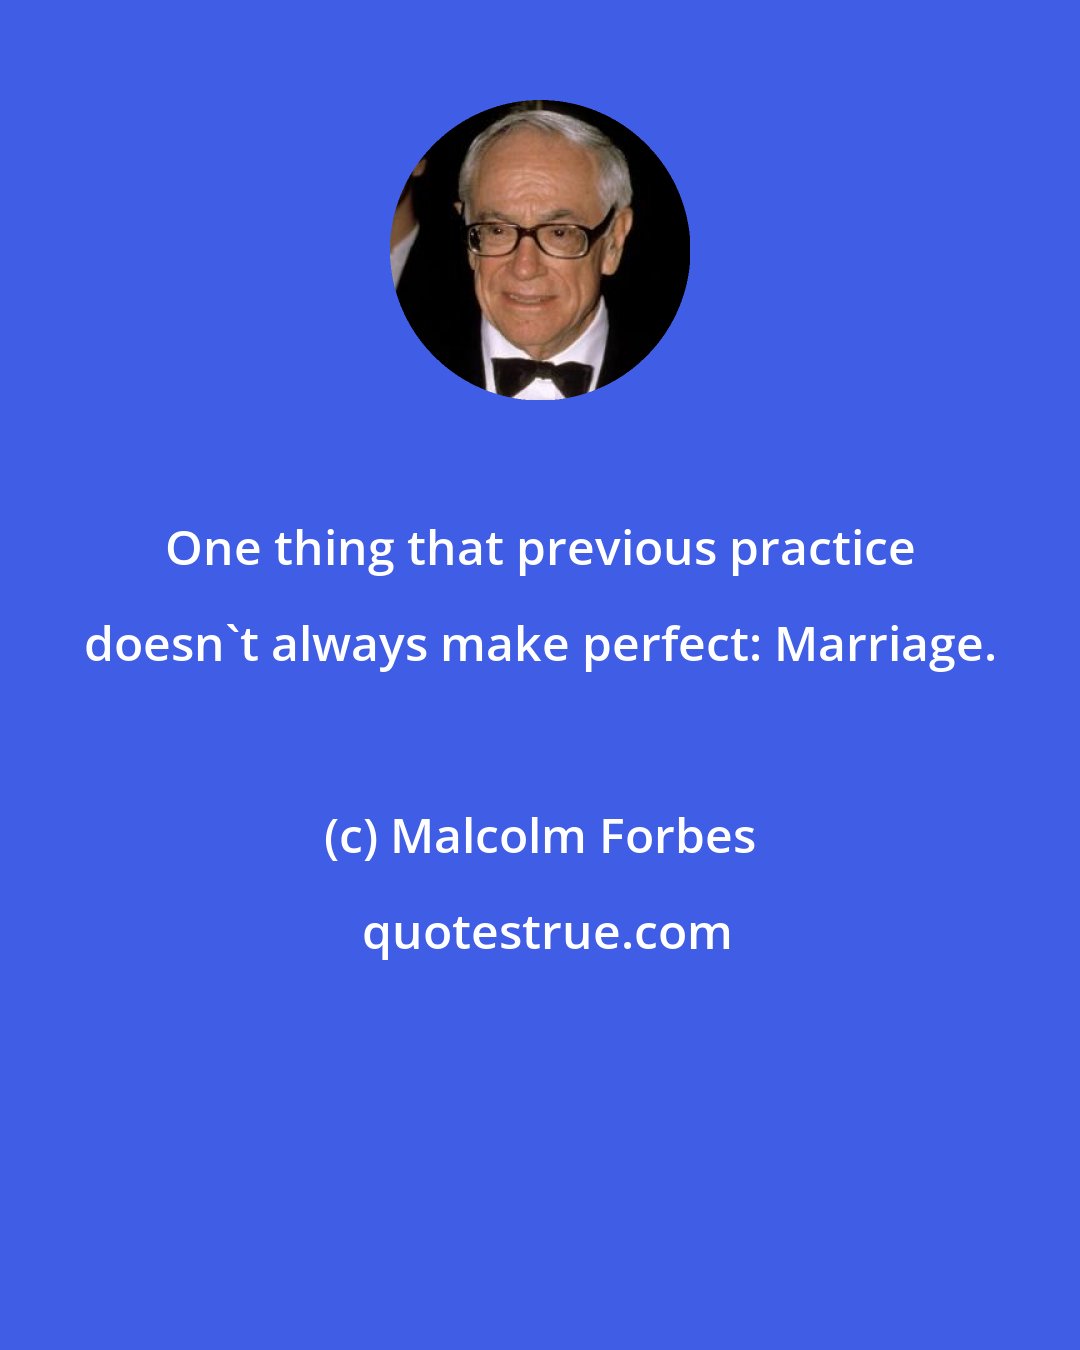 Malcolm Forbes: One thing that previous practice doesn't always make perfect: Marriage.